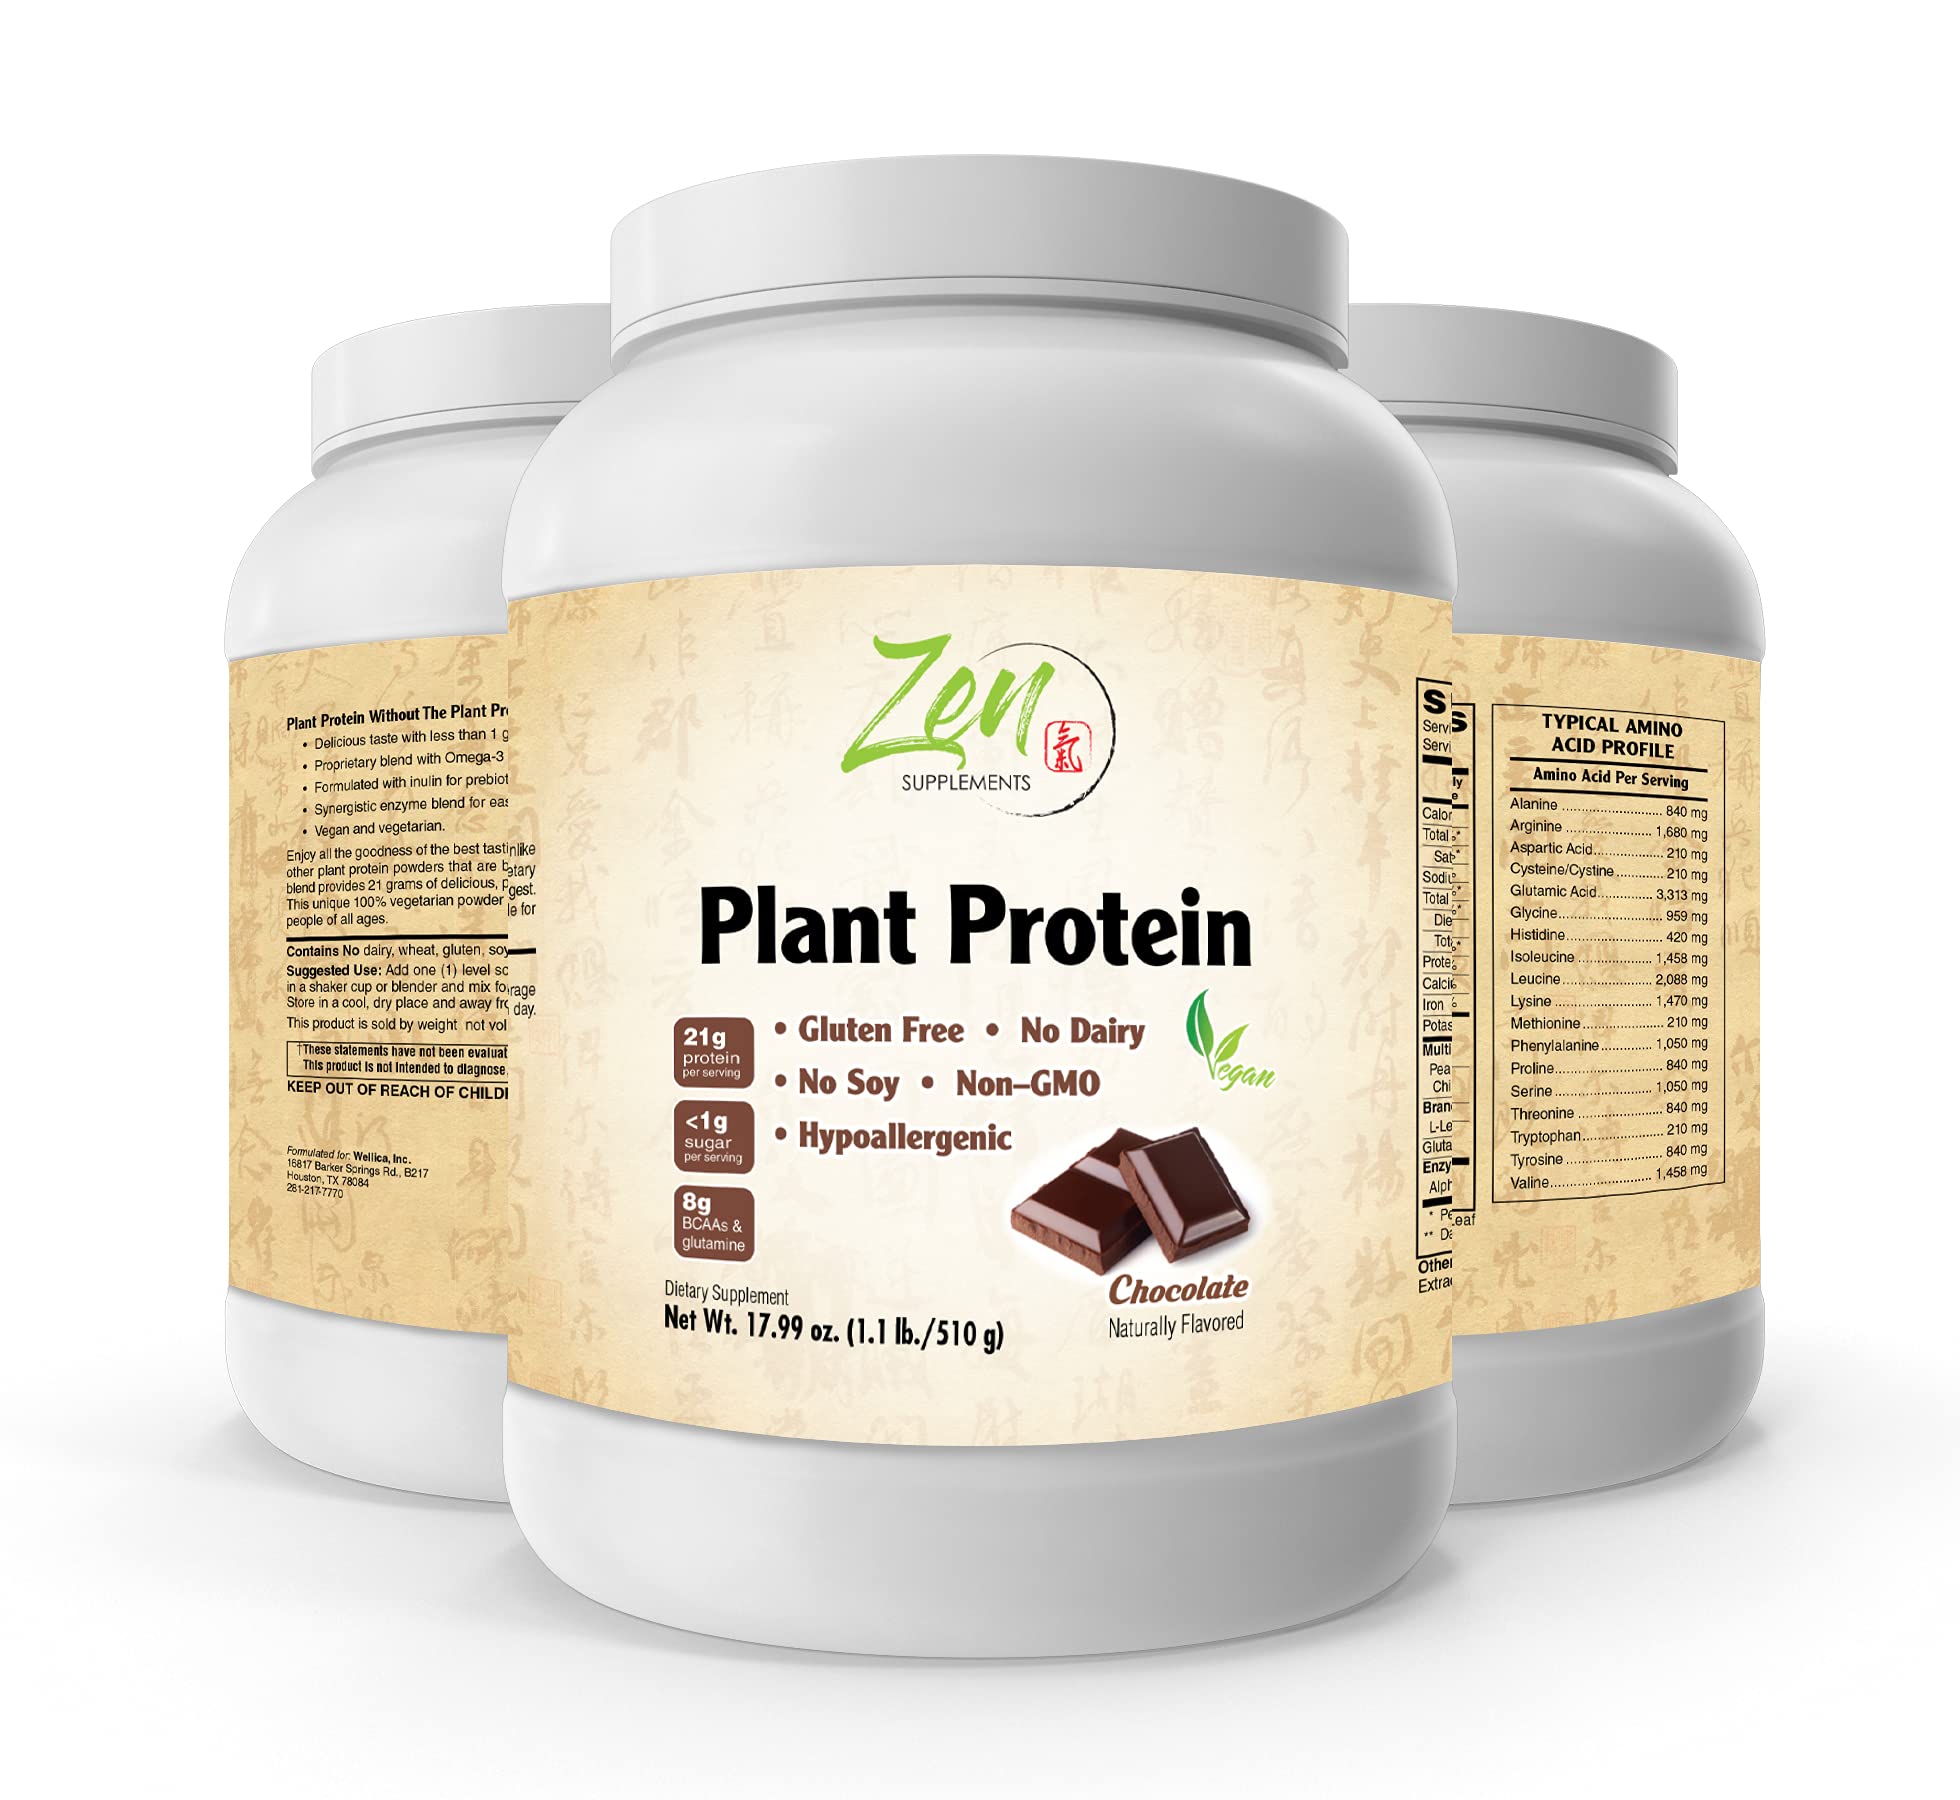 Zen Supplements - Plant Protein-Chocolate 510G 1.1LB -Powder - 23 Grams of Protein Per Serving -Vegan, Low Net Carbs, Non Dairy, Gluten Free, Lactose Free, No Sugar Added, Soy Free, Kosher, Non-GMO